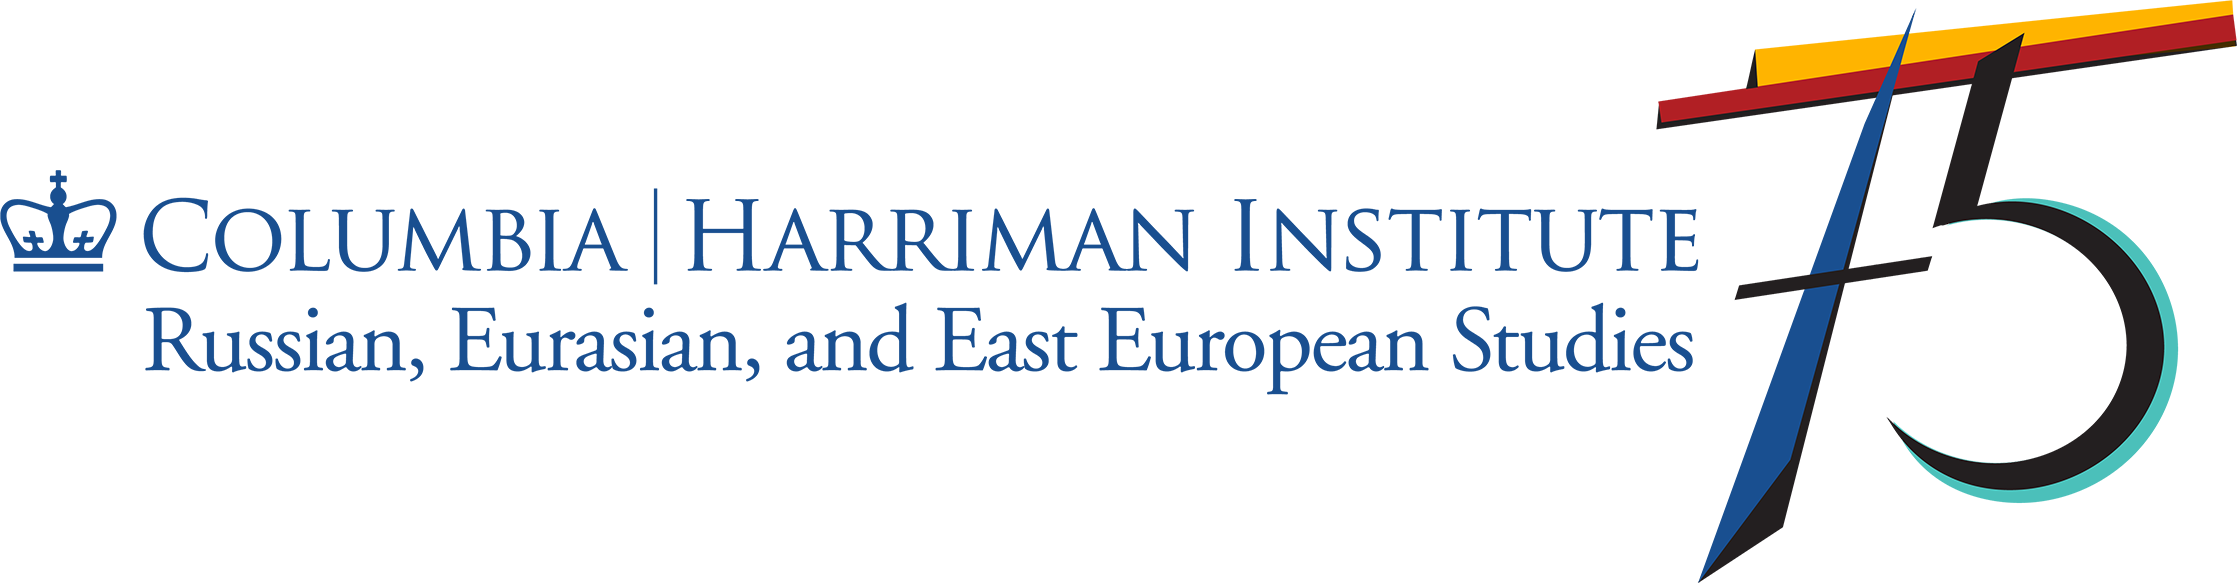 Harriman Institute at 75 logo with colorful 75 next to text logo.